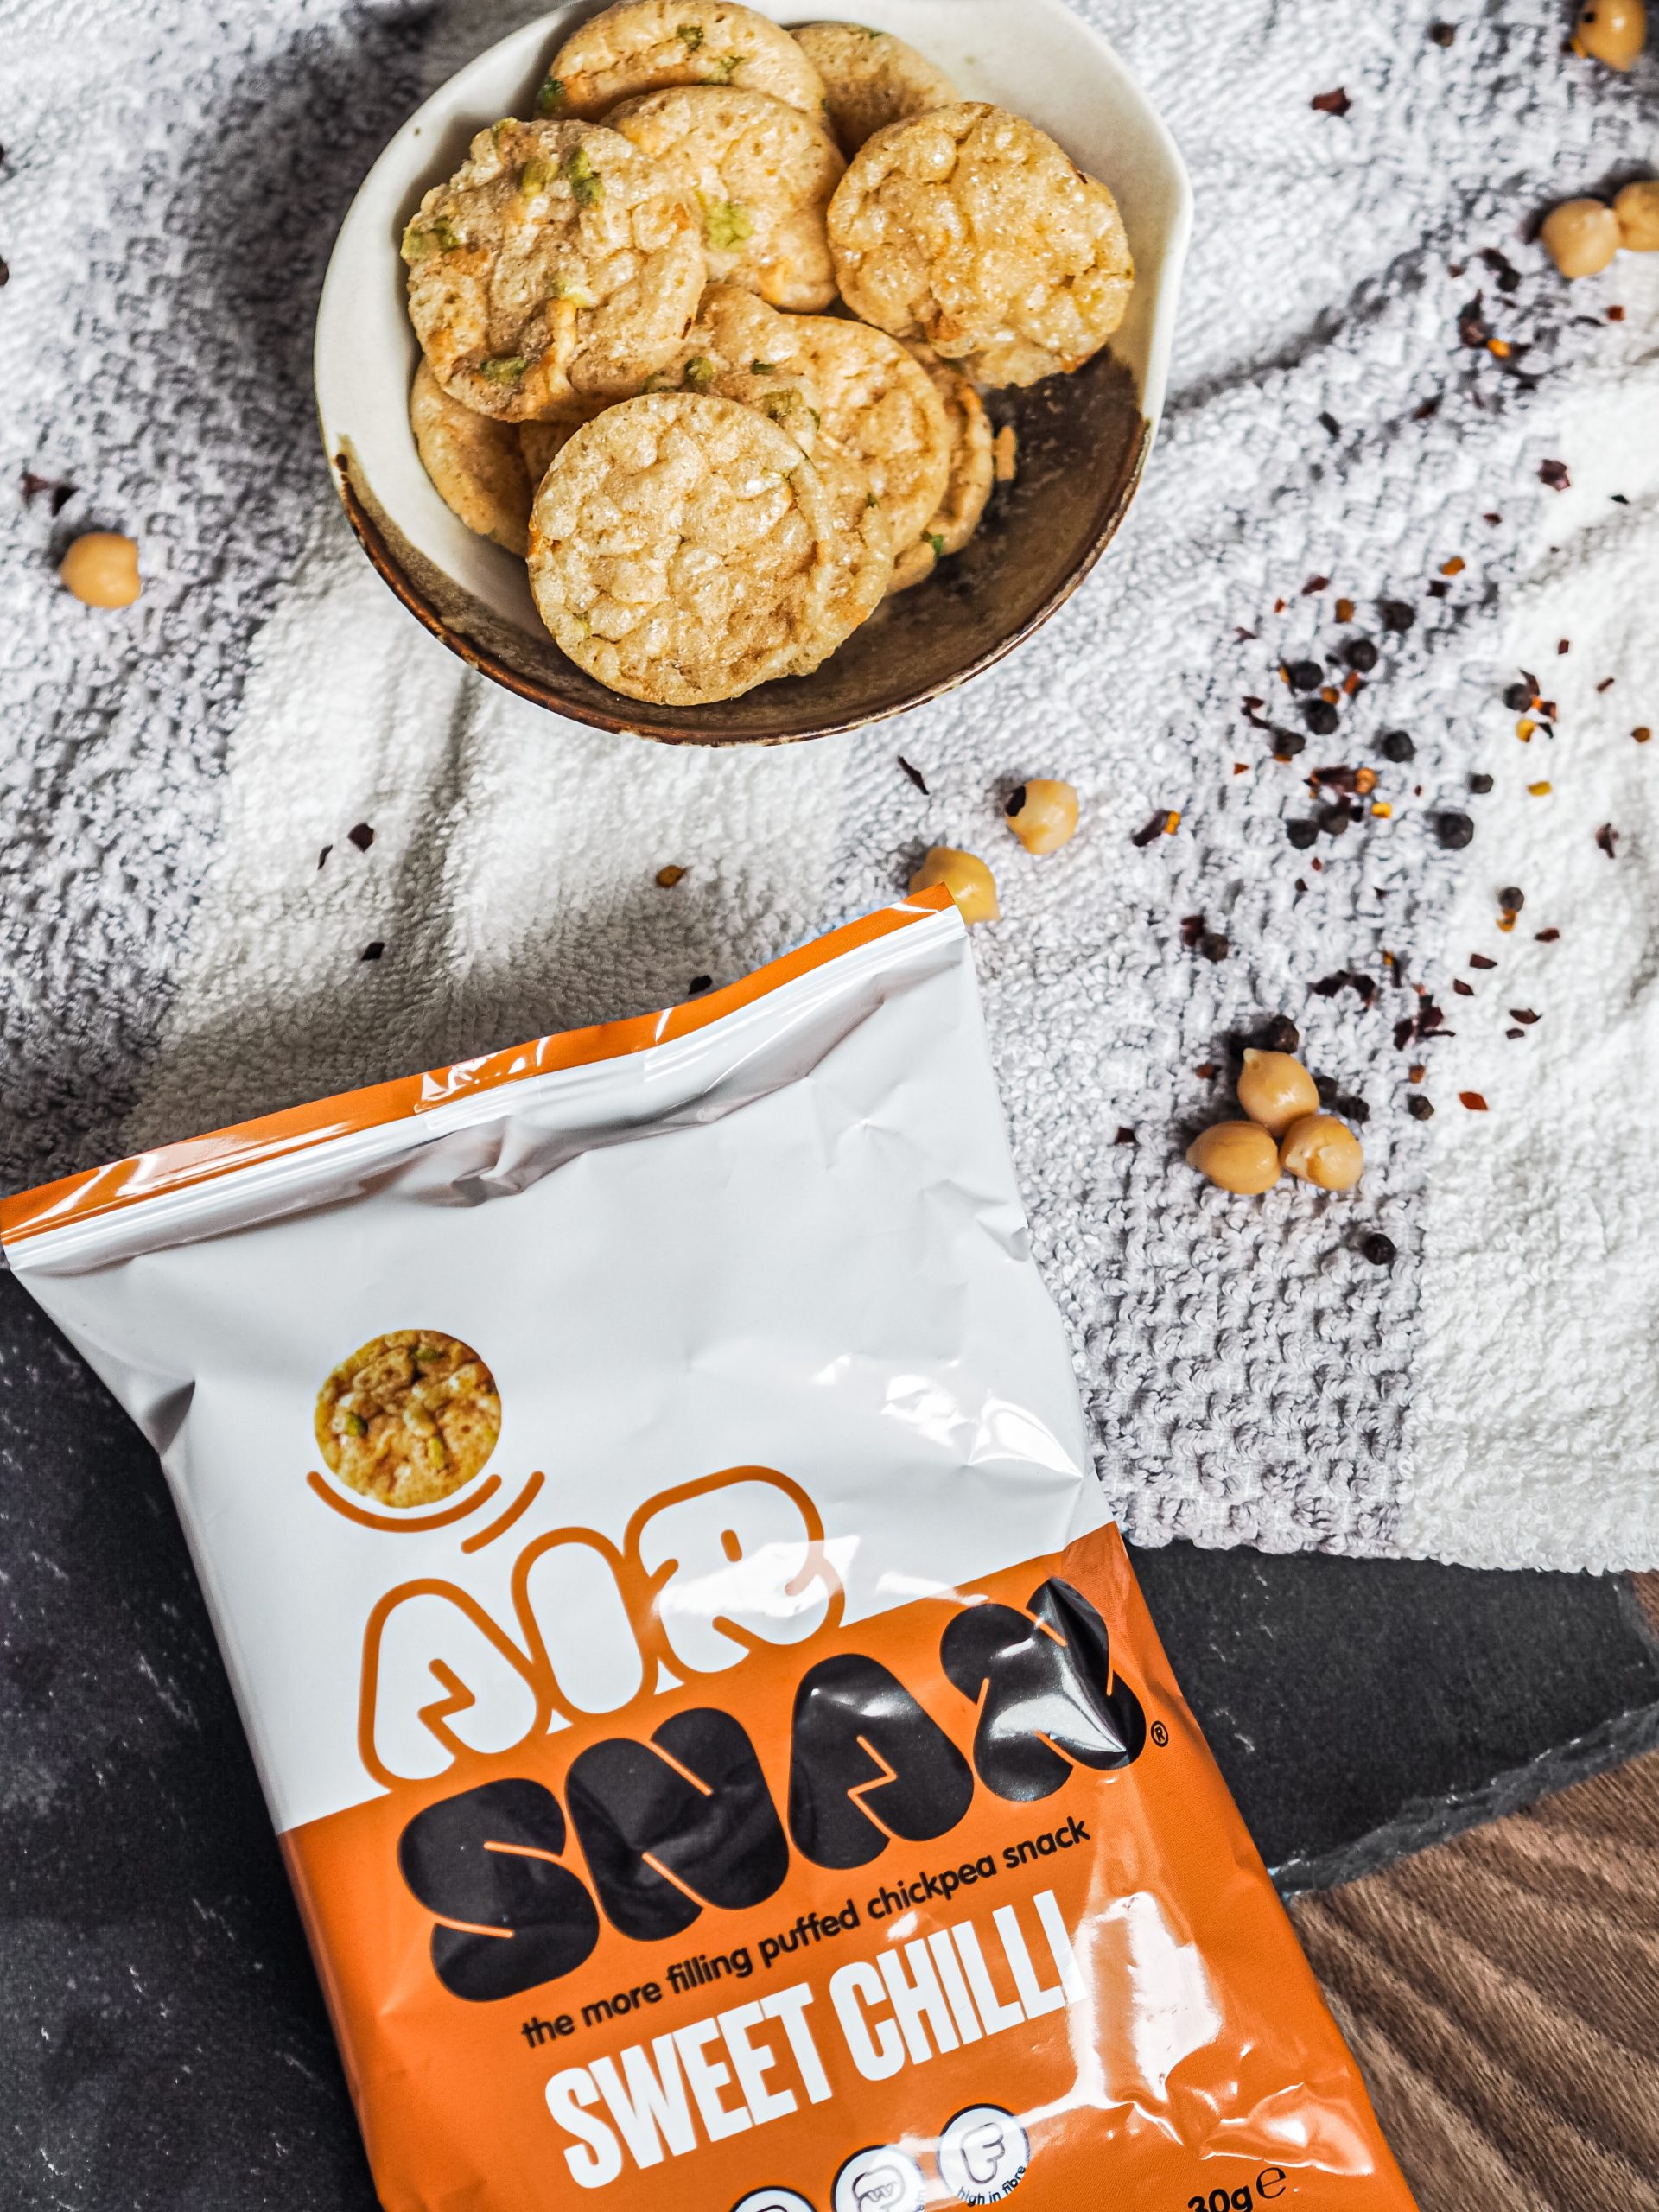 Laura Kate Lucas - Manchester Food, Drink and Lifestyle Blogger | Airsnax Healthy Chickpea Snack Review